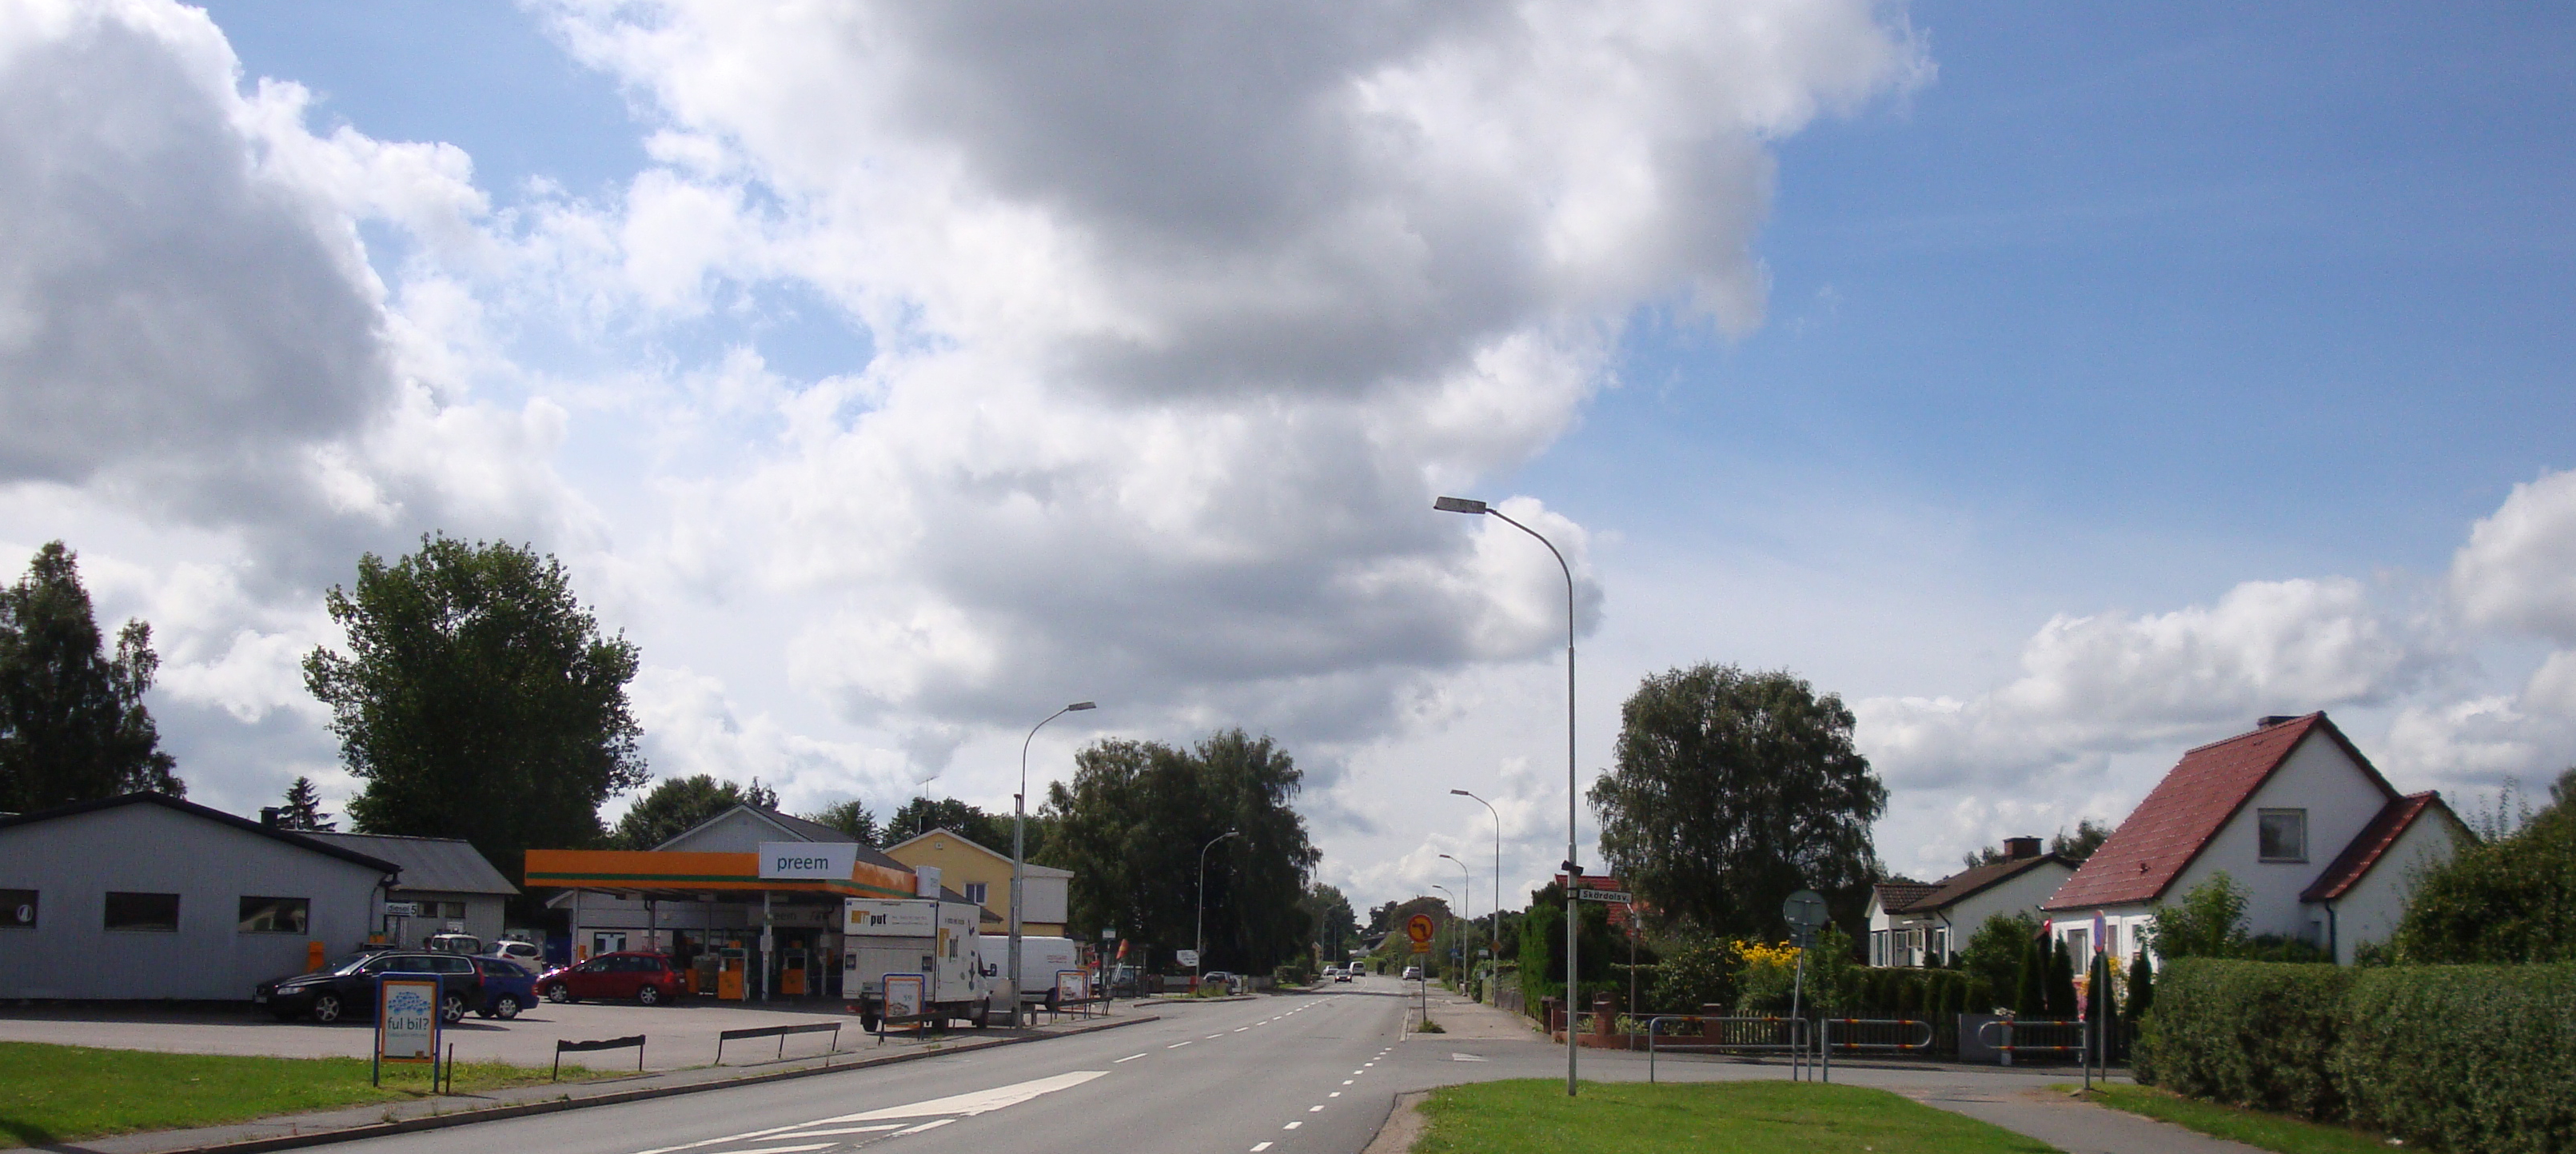 Vä is a former town in Scania, now a village in the municipality of Kristianstad in Sweden, ca 5 km southwest of the town of Kristianstad.